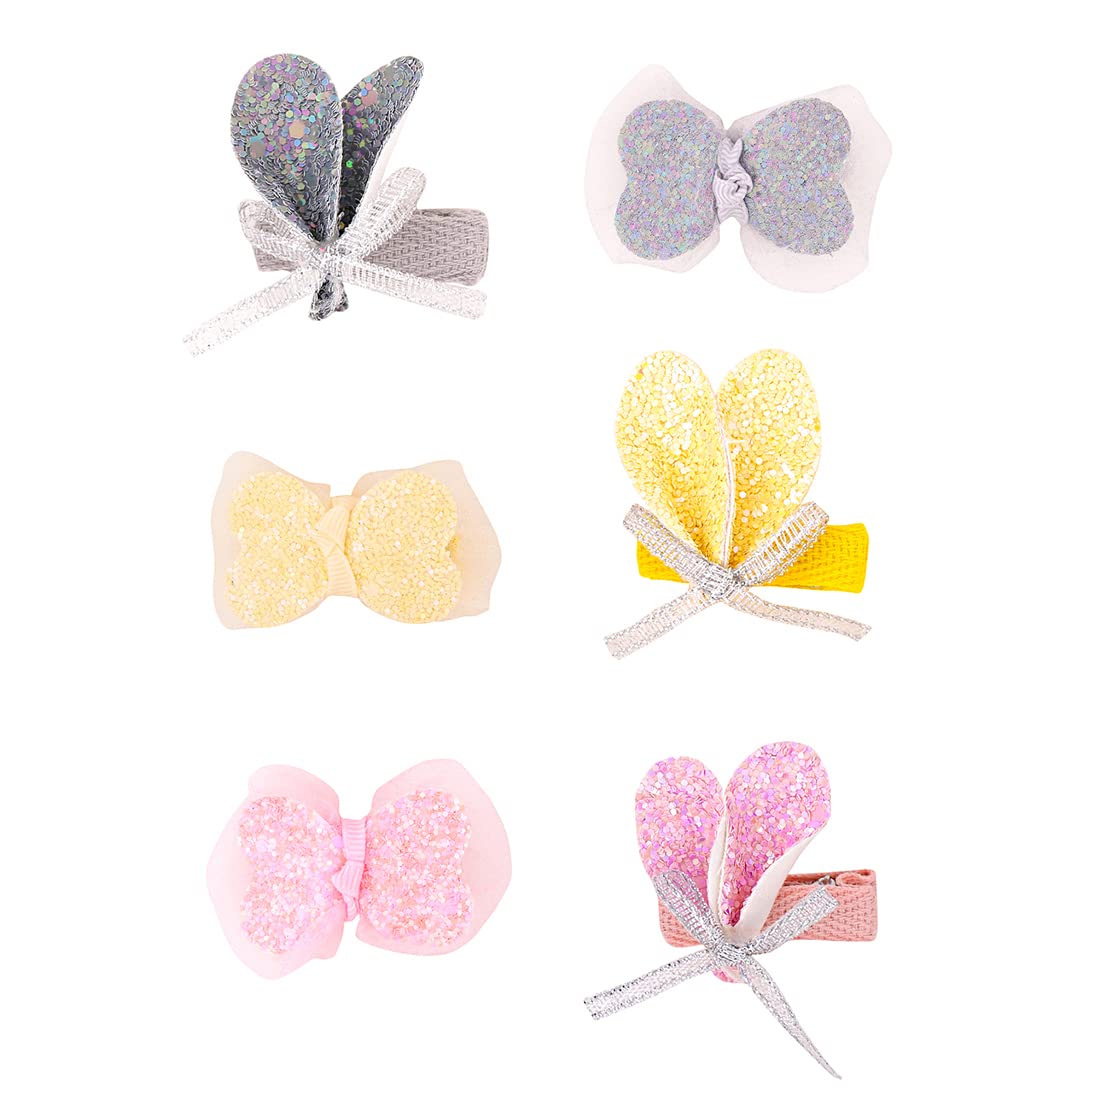 Melbees by Yellow Chimes Hair Clips for Girls Kids Hair Accessories for Girls Set of 6 Pcs Hairclips Multicolor Hair Bows Hair Clips for Kids Aligator Clips for Hair Clip Hair Accessories Set.